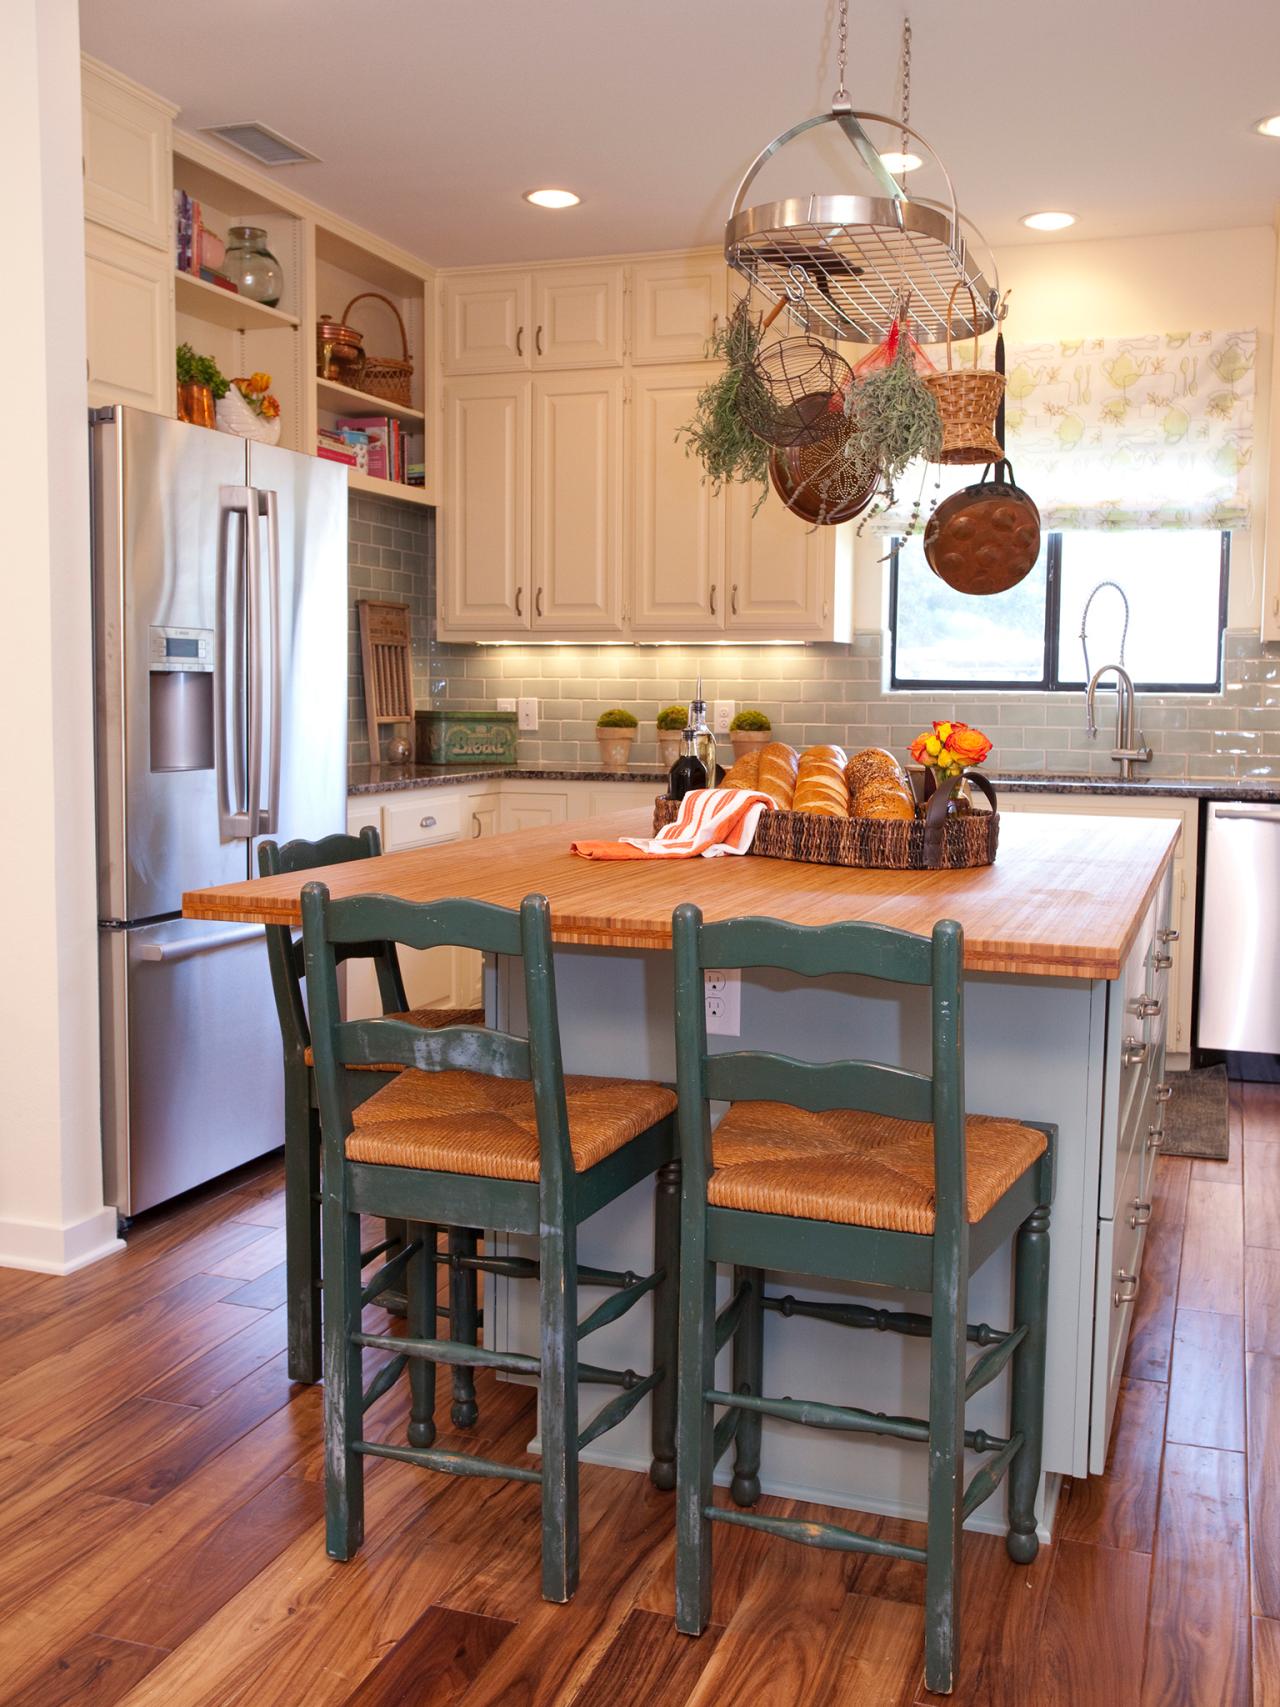 Small Kitchen Island Ideas: Pictures & Tips From HGTV | HGTV